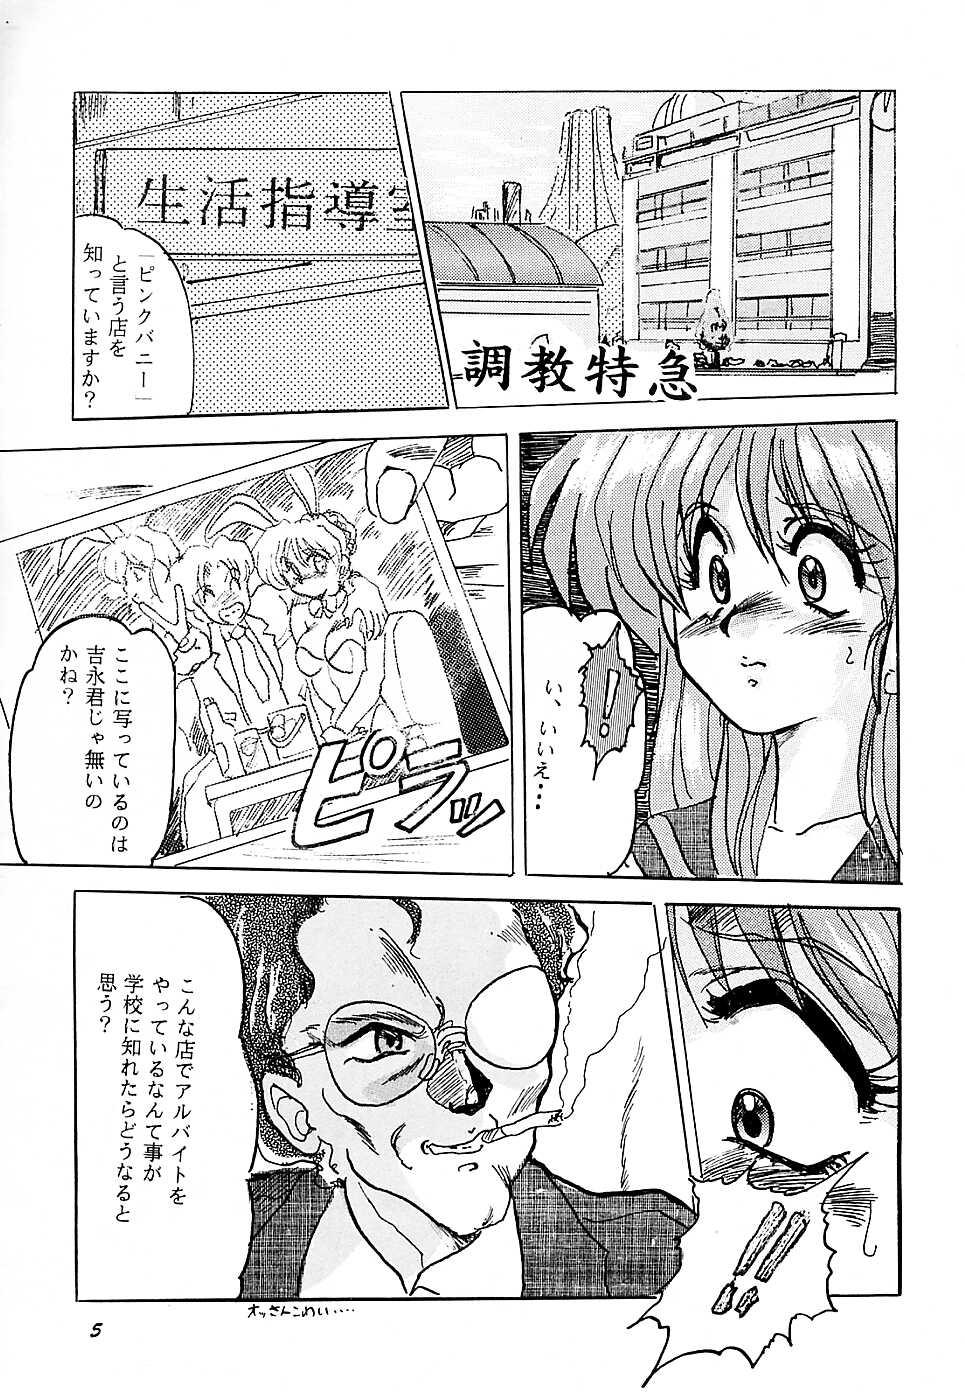 Orgame F 93C - Brave express might gaine Gangbang - Page 4